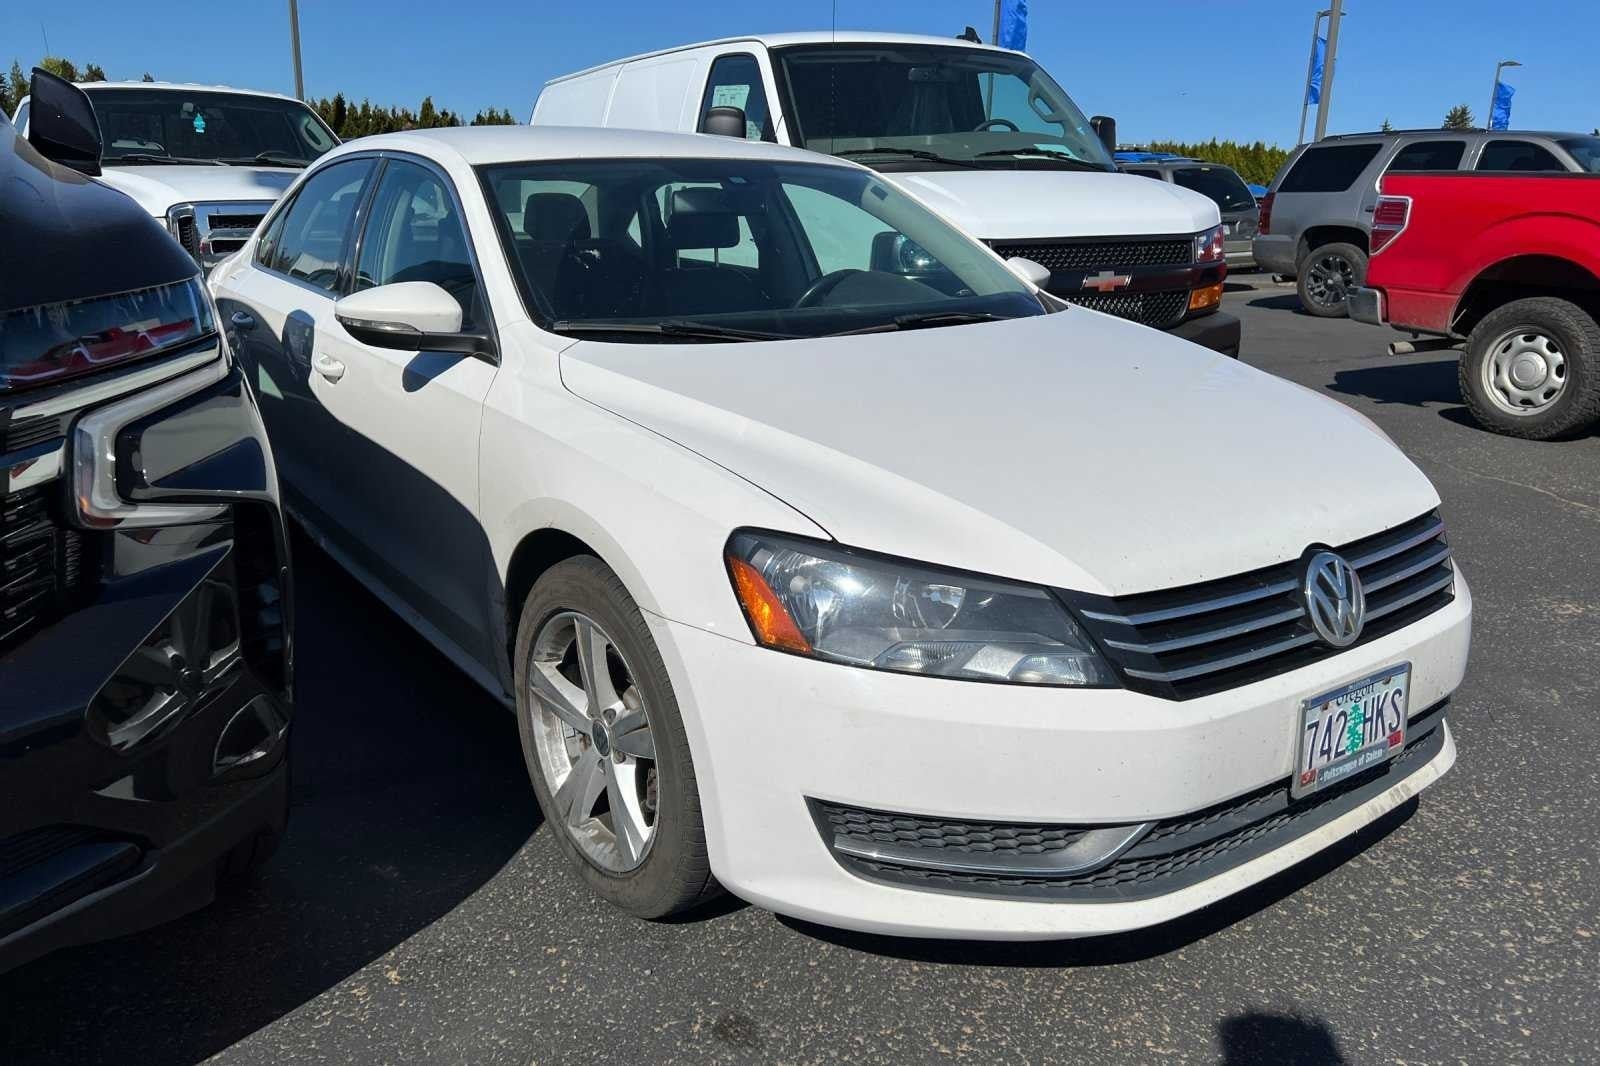 Used 2012 Volkswagen Passat SE with VIN 1VWBP7A39CC025632 for sale in Sublimity, OR